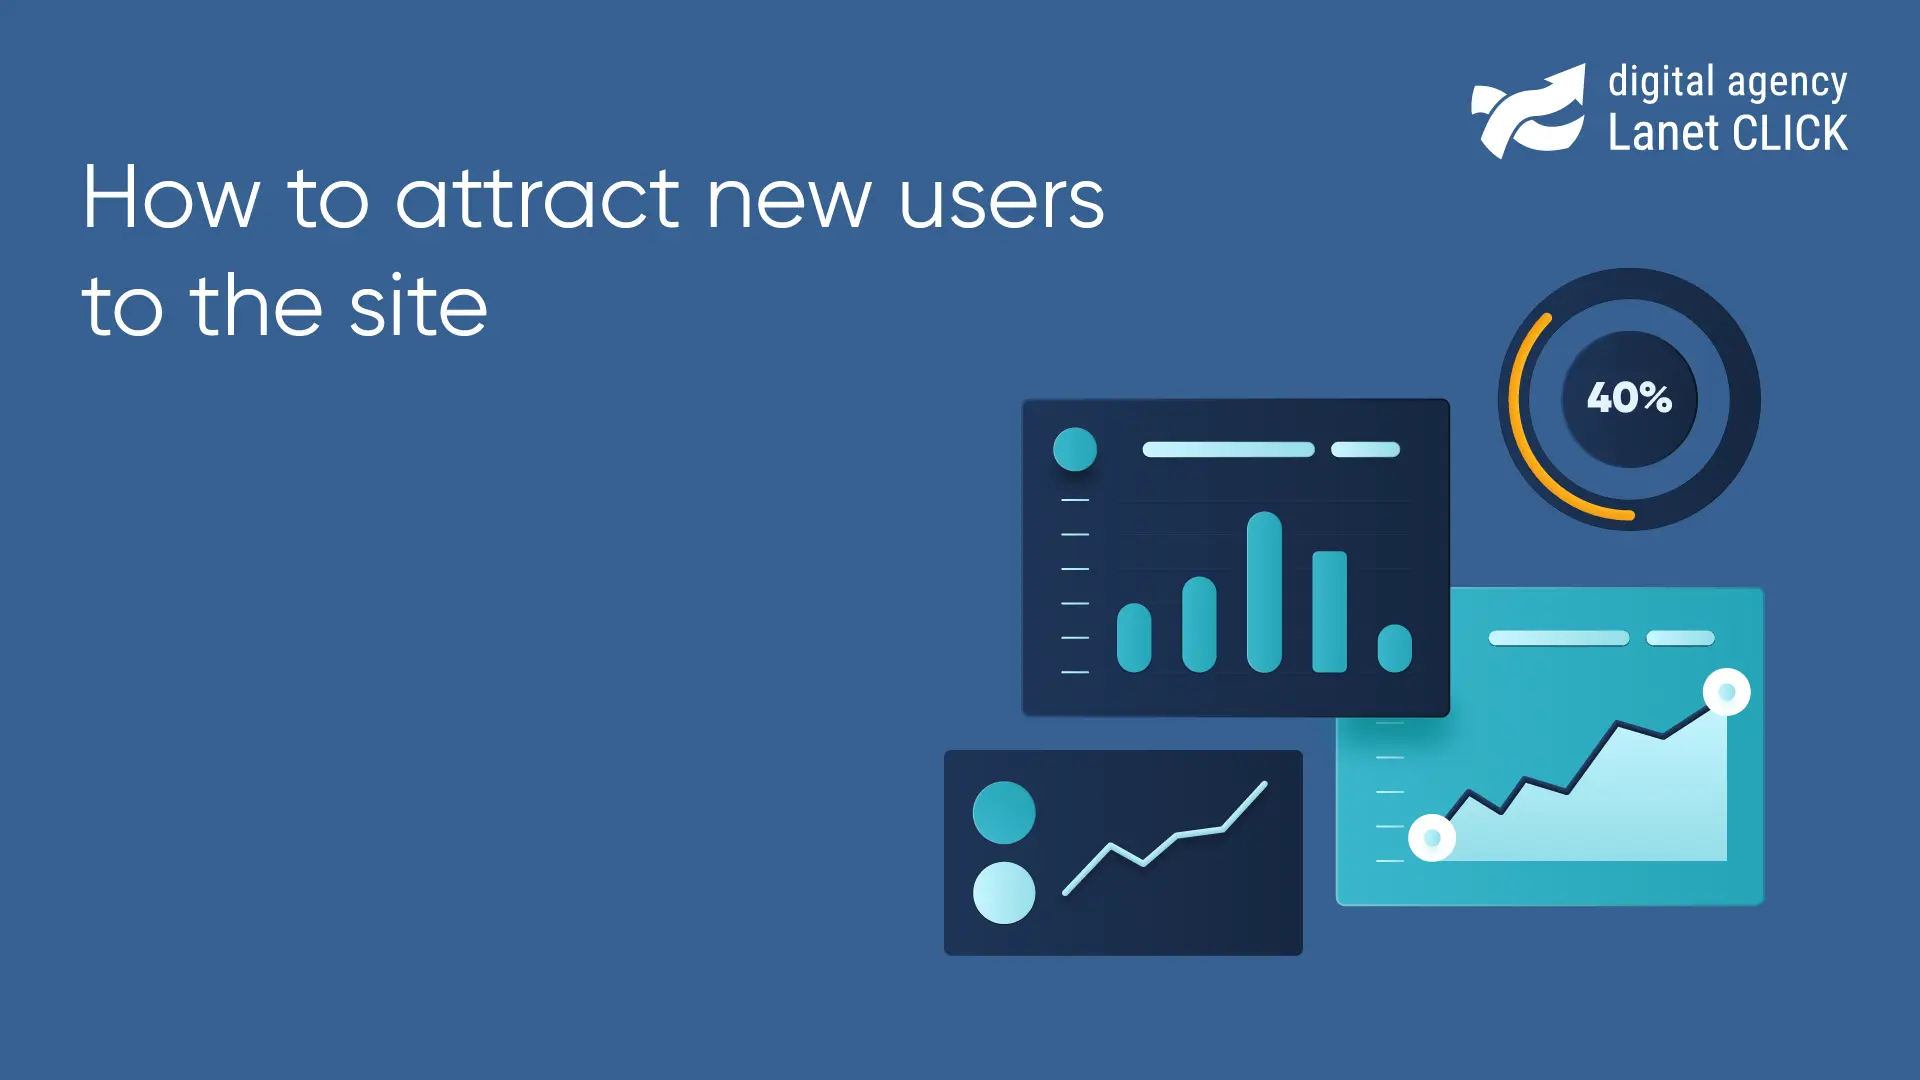 How to attract new users to the site